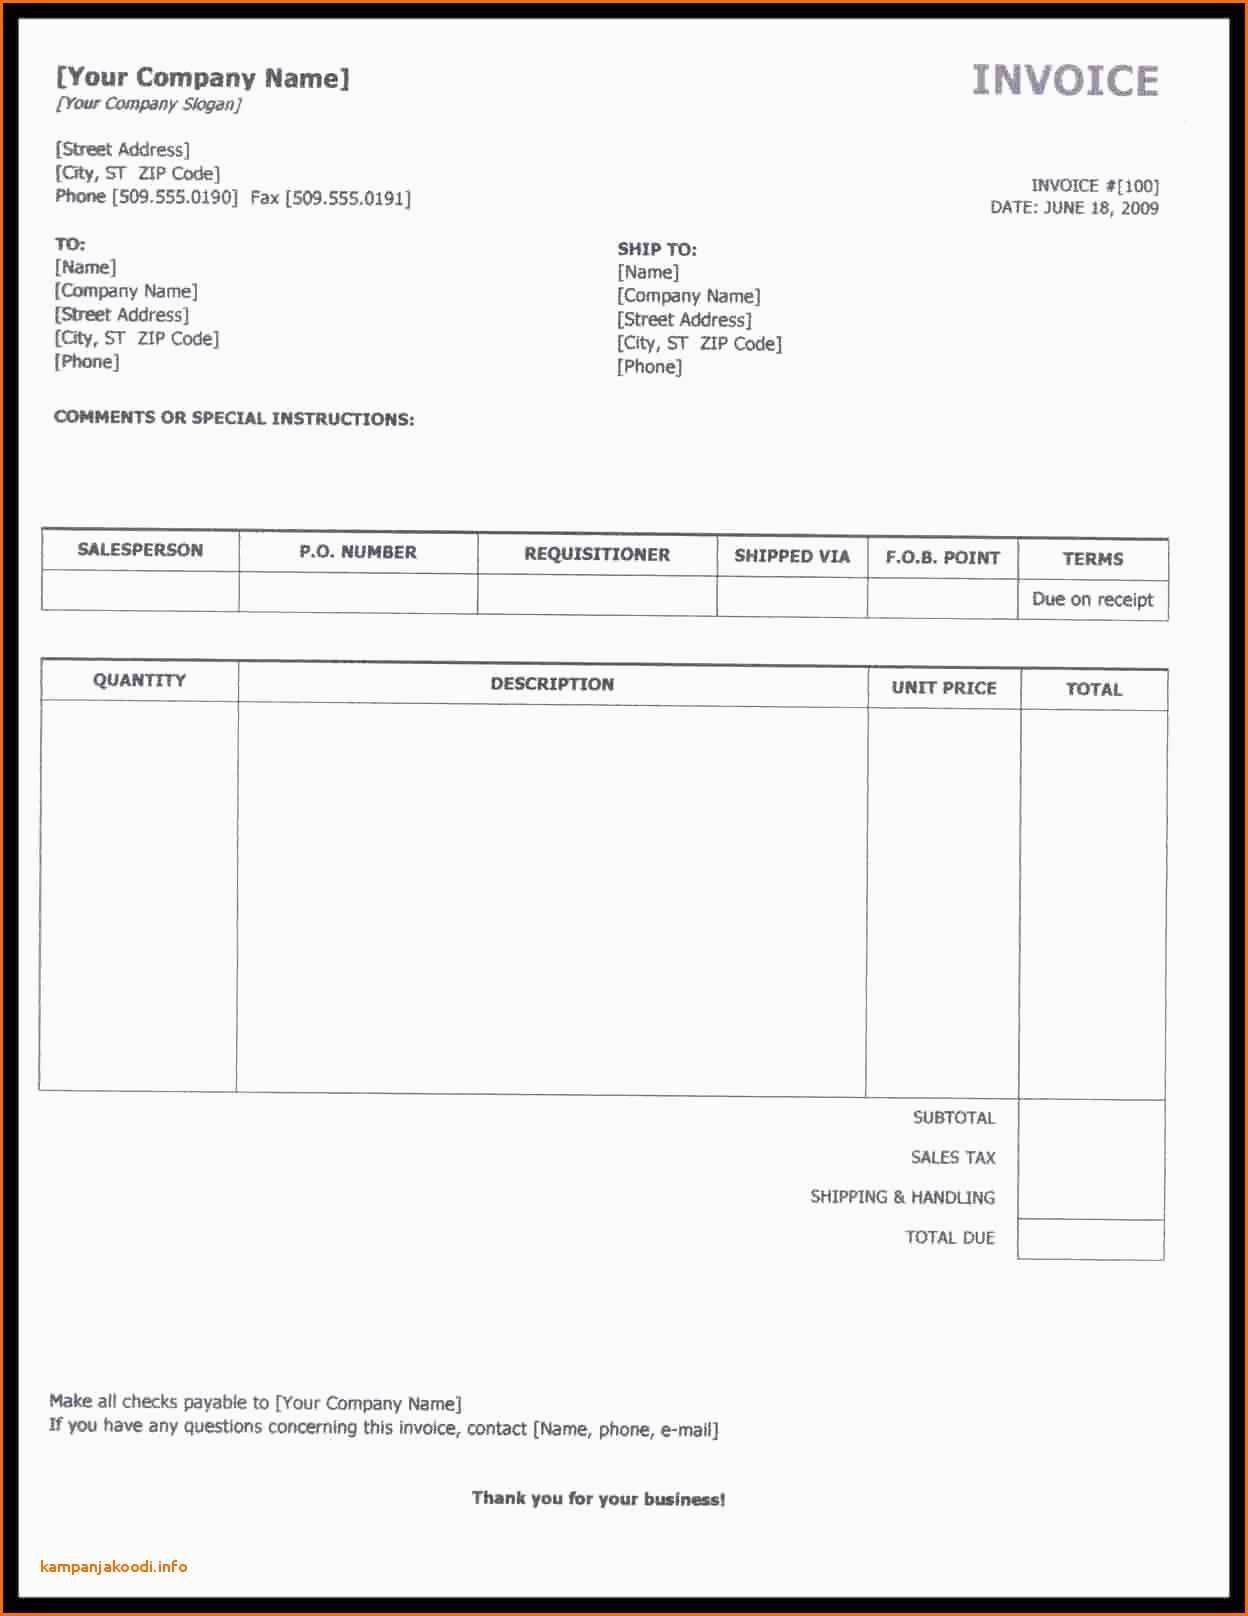 Invoice Template For Builders